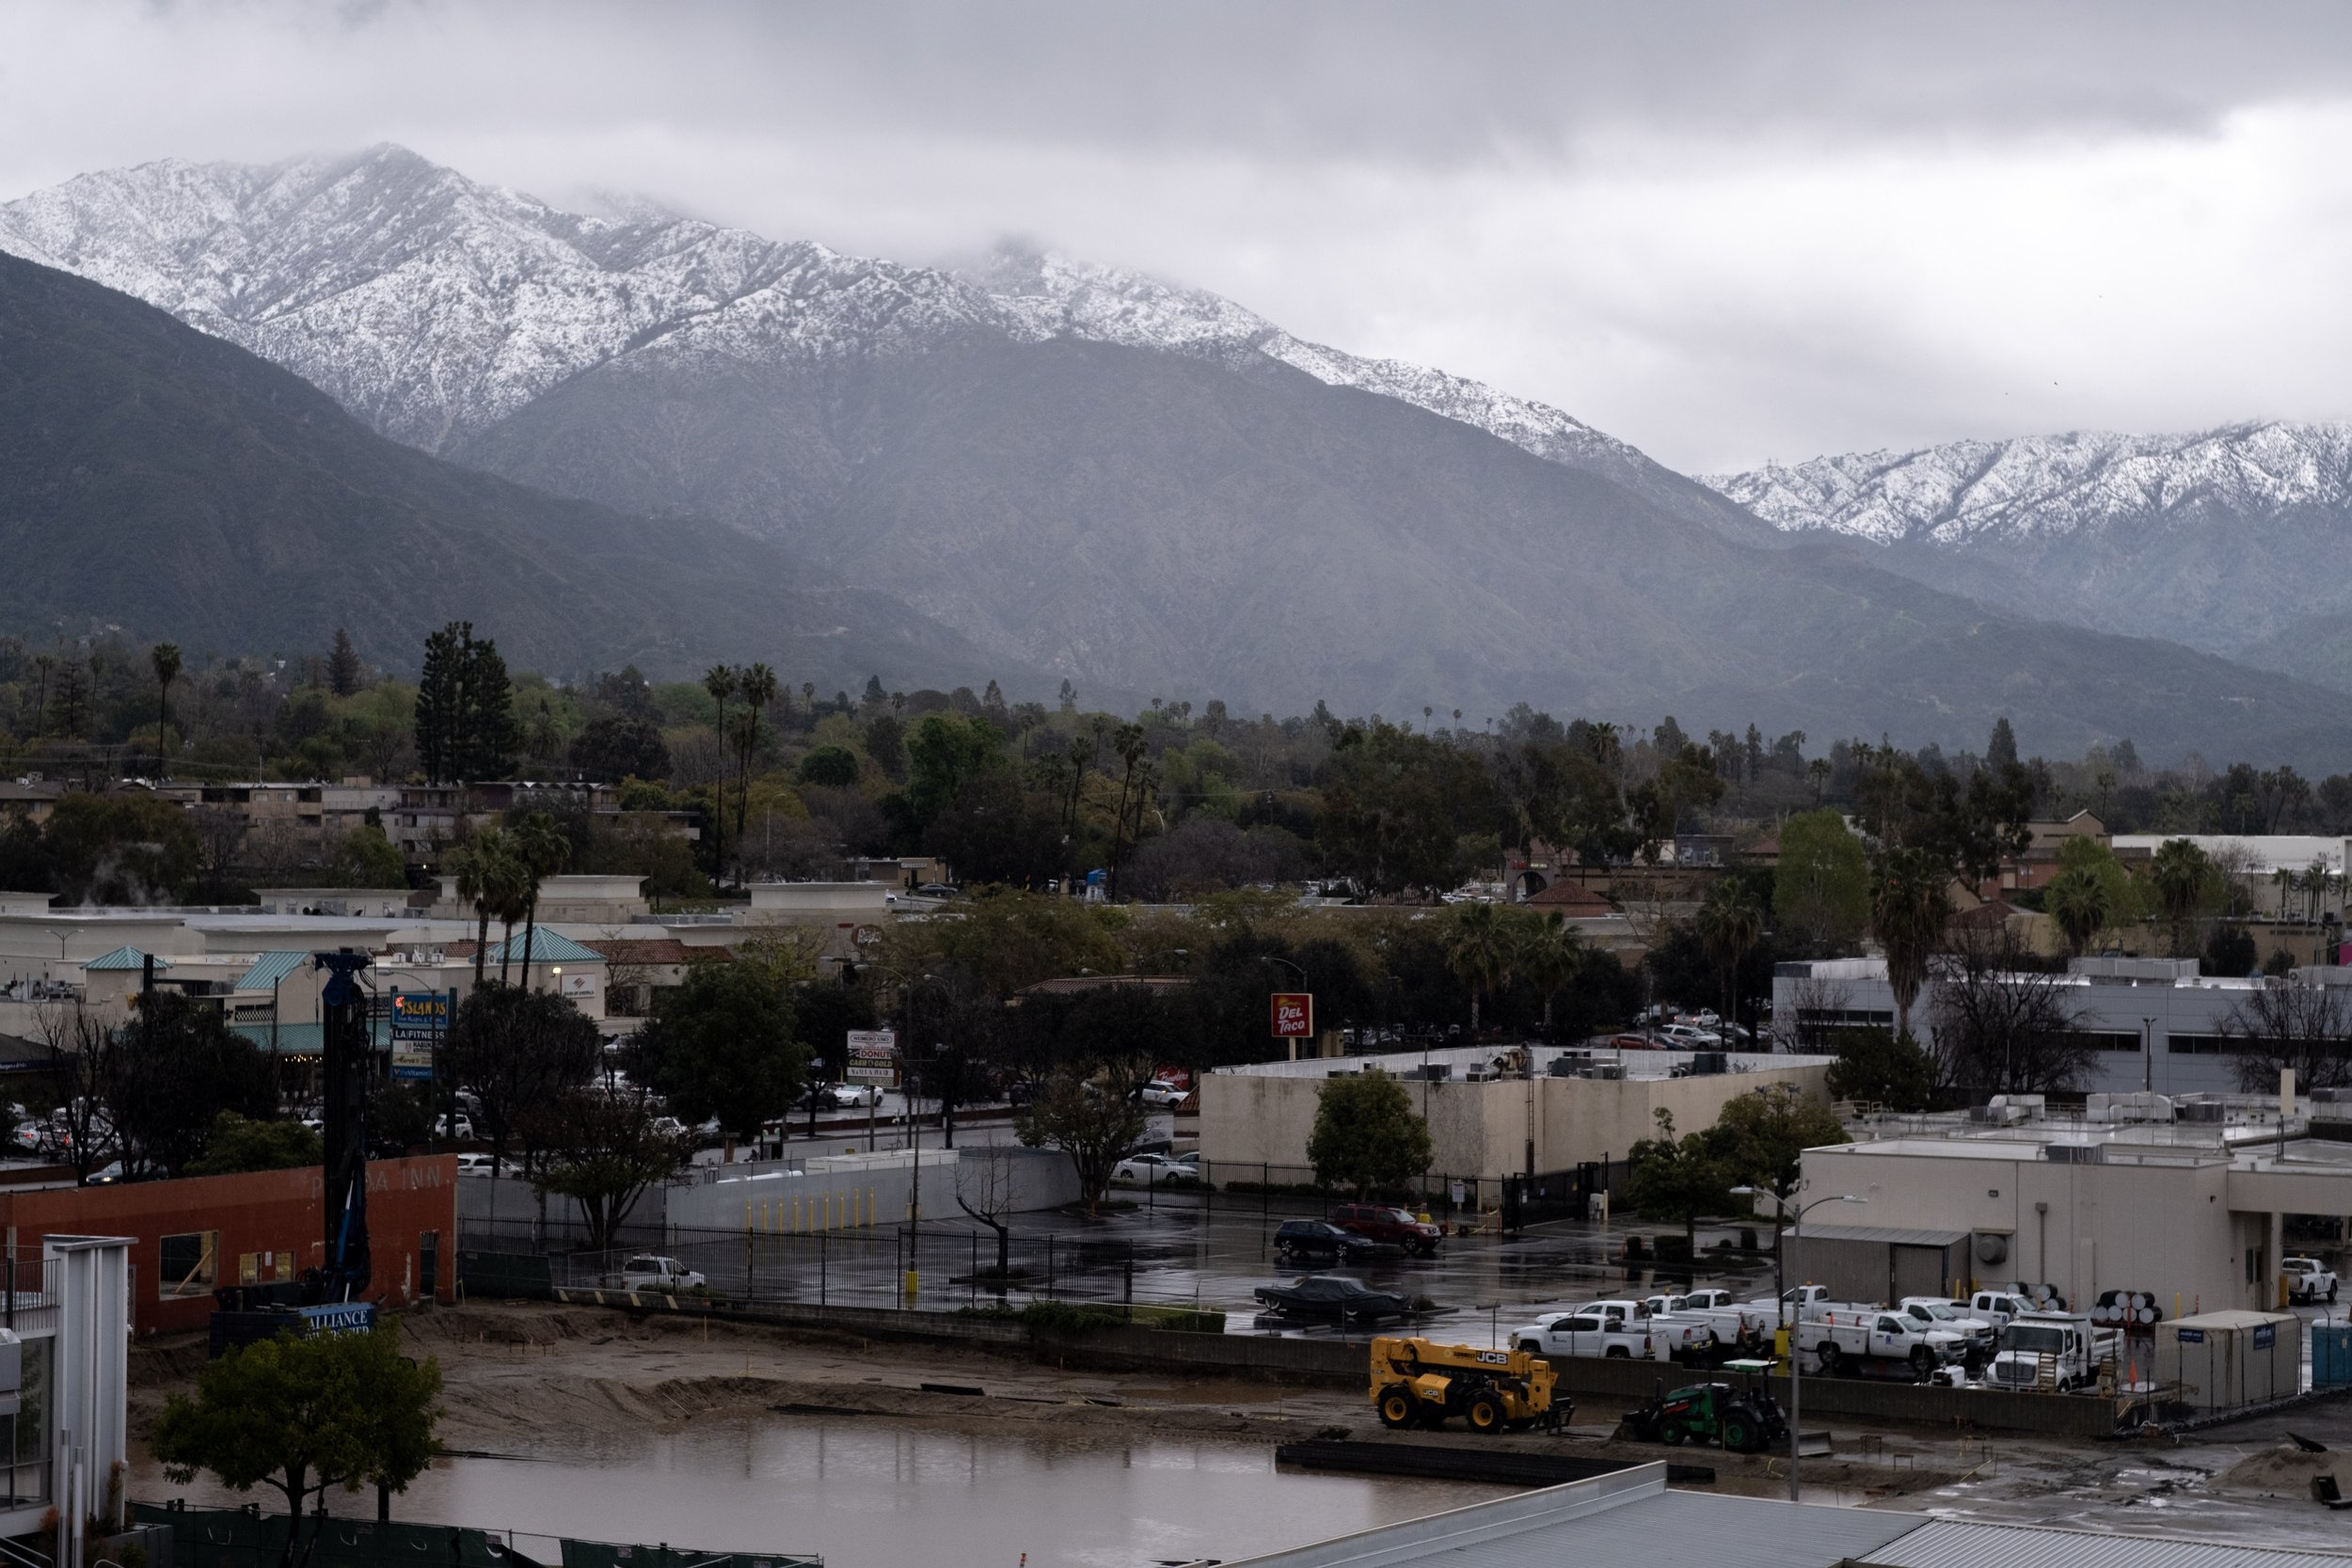  Historic winter storms hit Southern California this week. Snowfall at low elevations created unusual views on Saturday, February 25, 2023, with snow clearly visible in the foothills as seen from the Sierra Madre Villa Metro Station in Sierra Madre, 